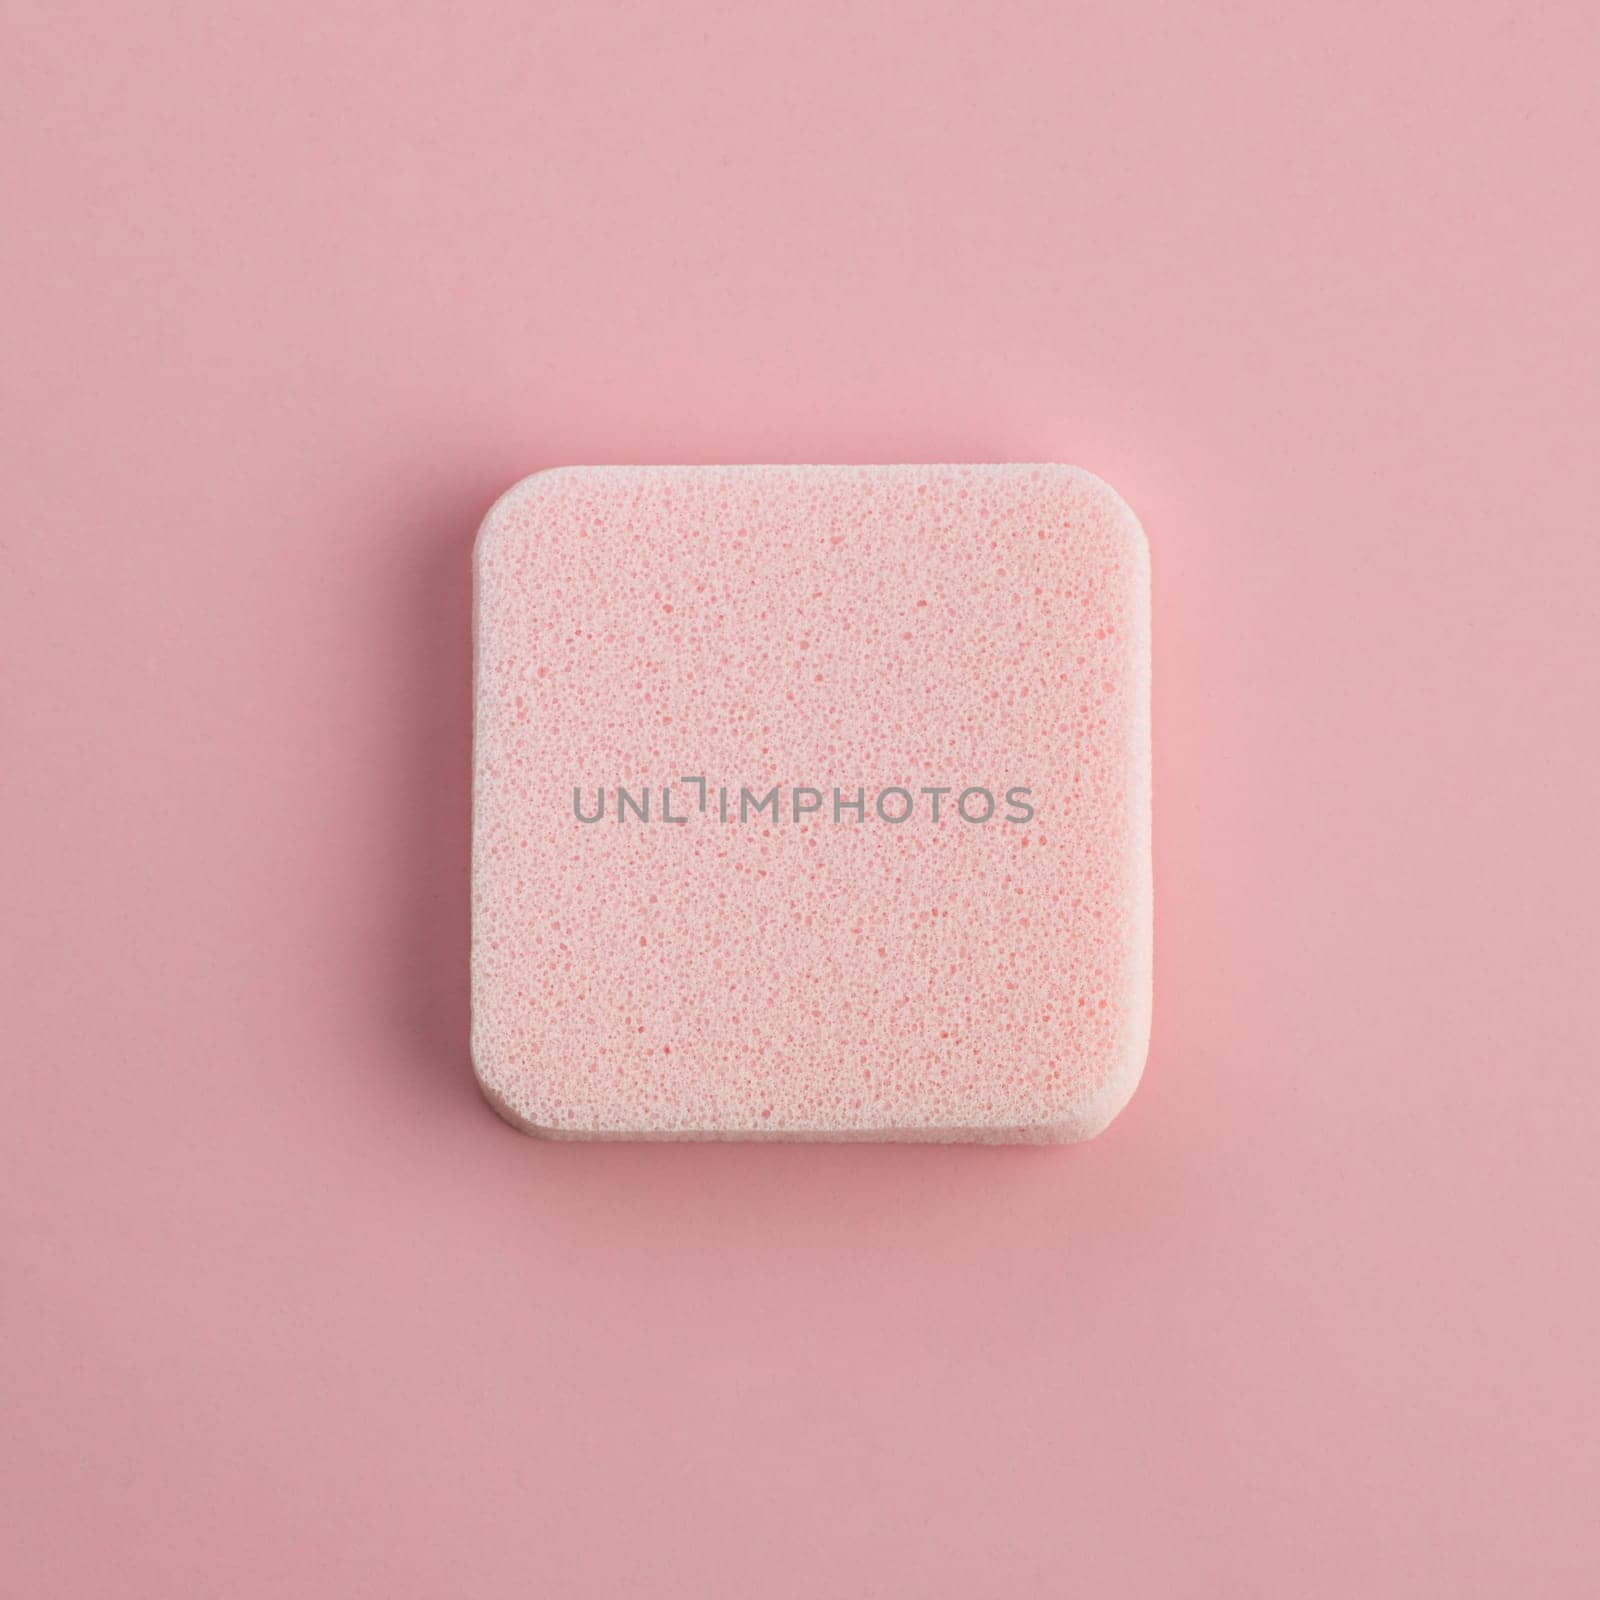 Cosmetic sponge on a pink background. Top view